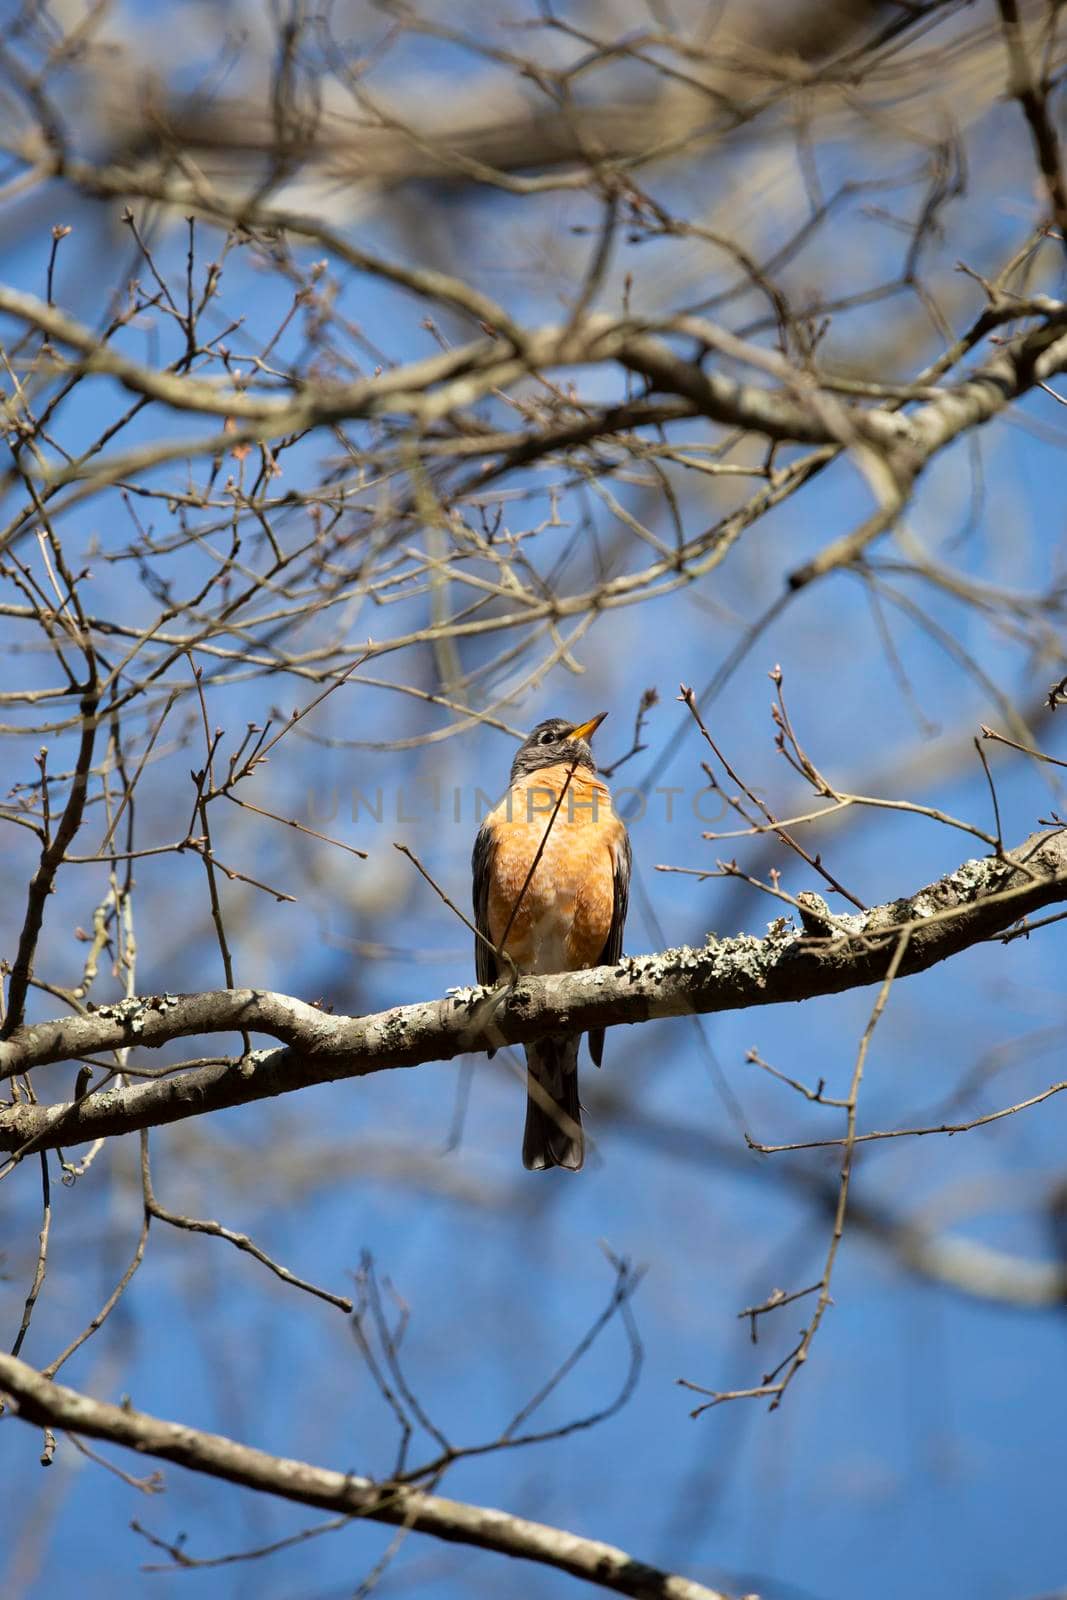 Curious American robin (Turdus migratorius) looking around from its perch on a tree limb on a nice day and fluffing out in a territorial display